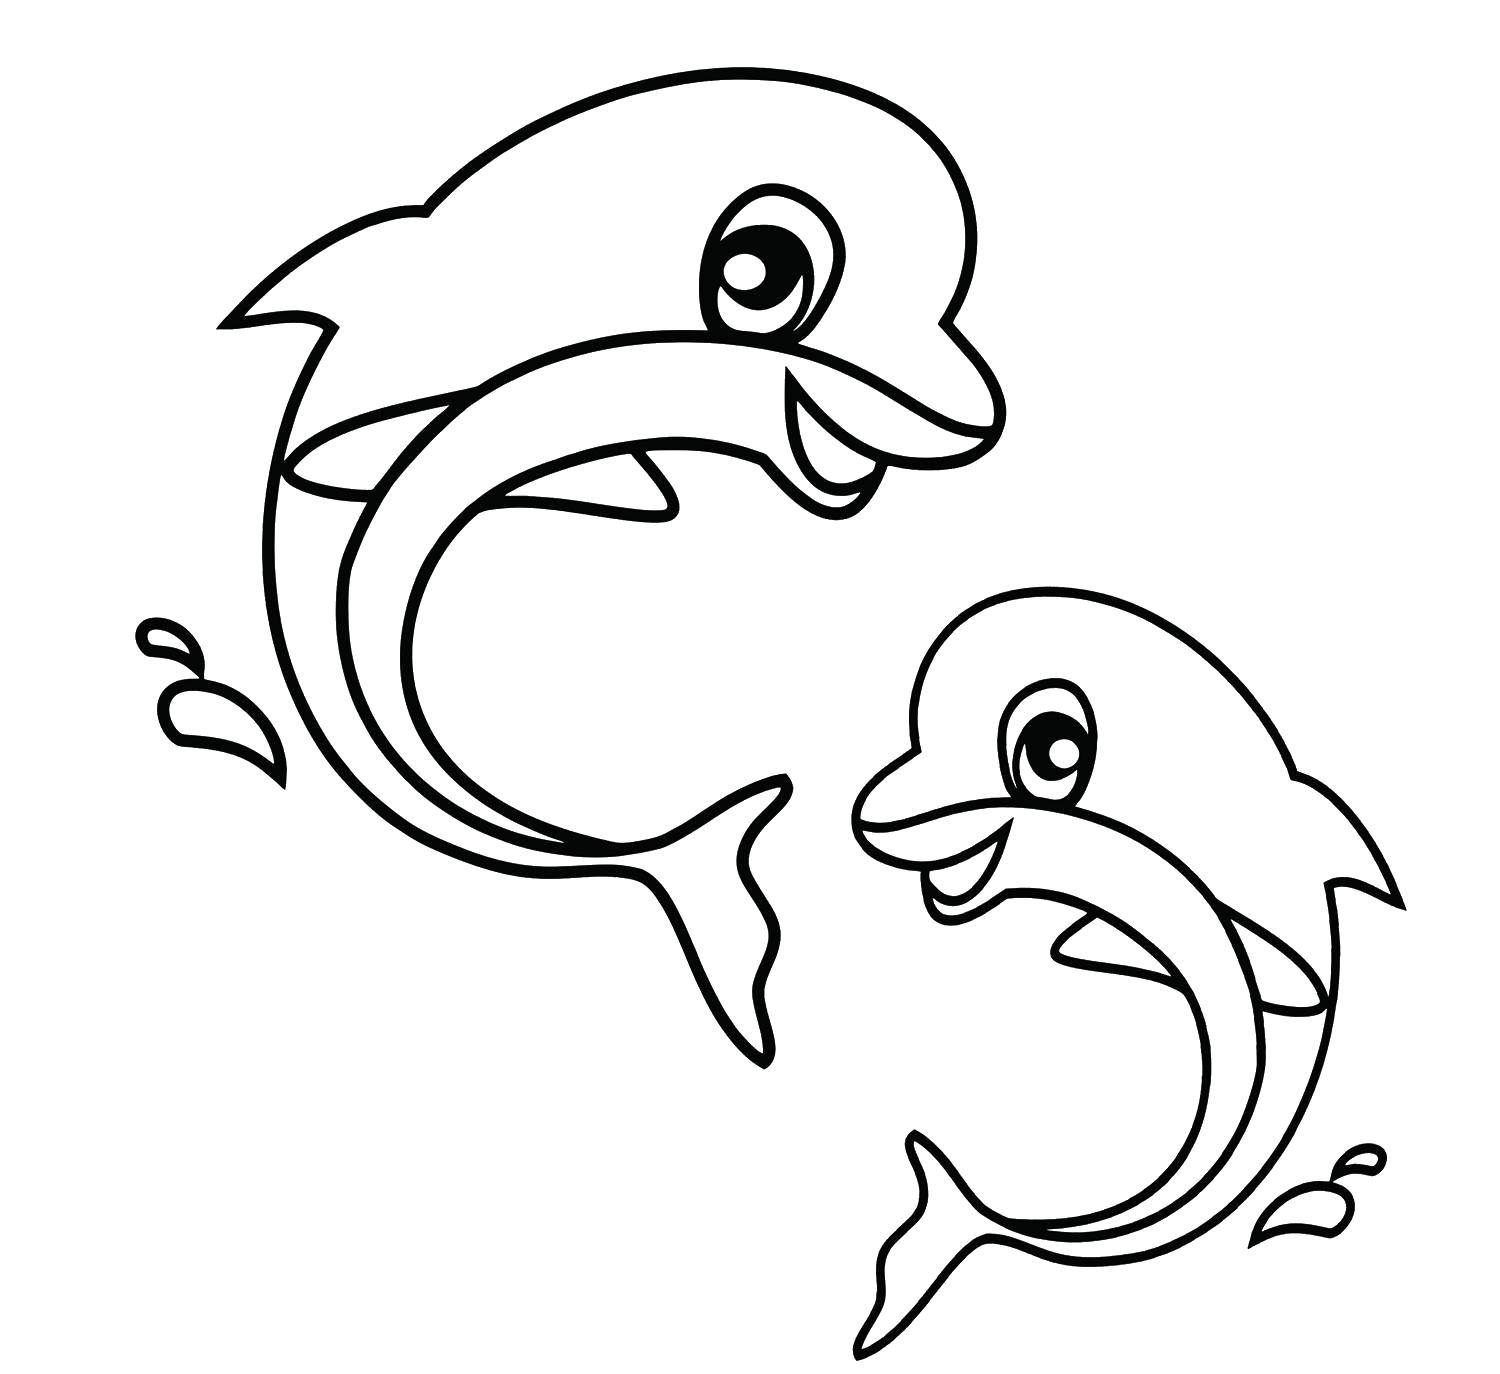 Coloring Two gay Dolphin. Category little ones. Tags:  Underwater world, Dolphin.